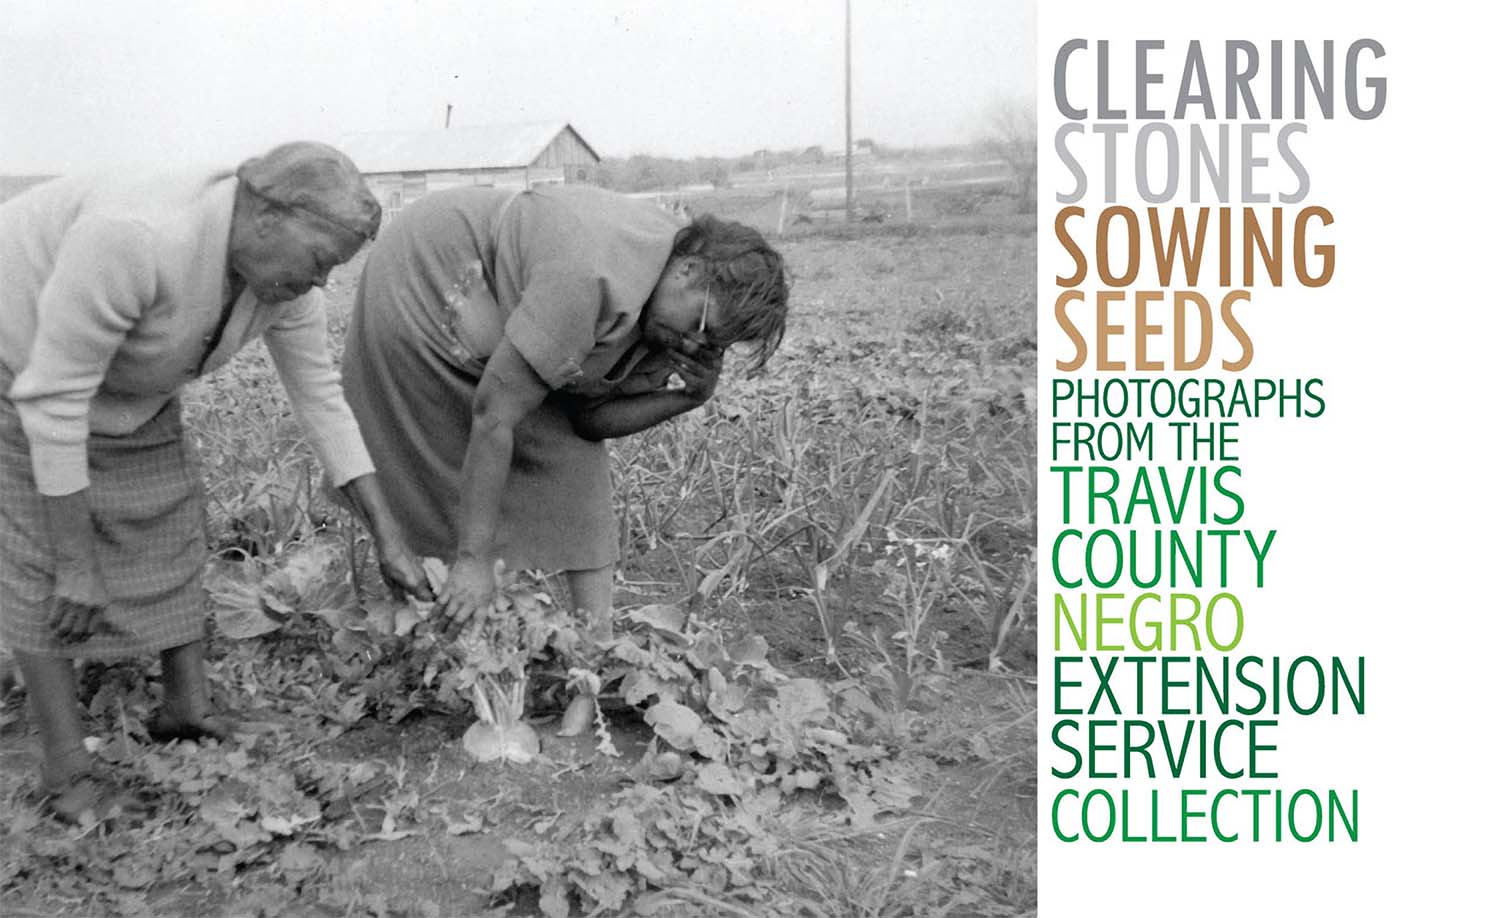 Travis County Negro Extension Service Collection